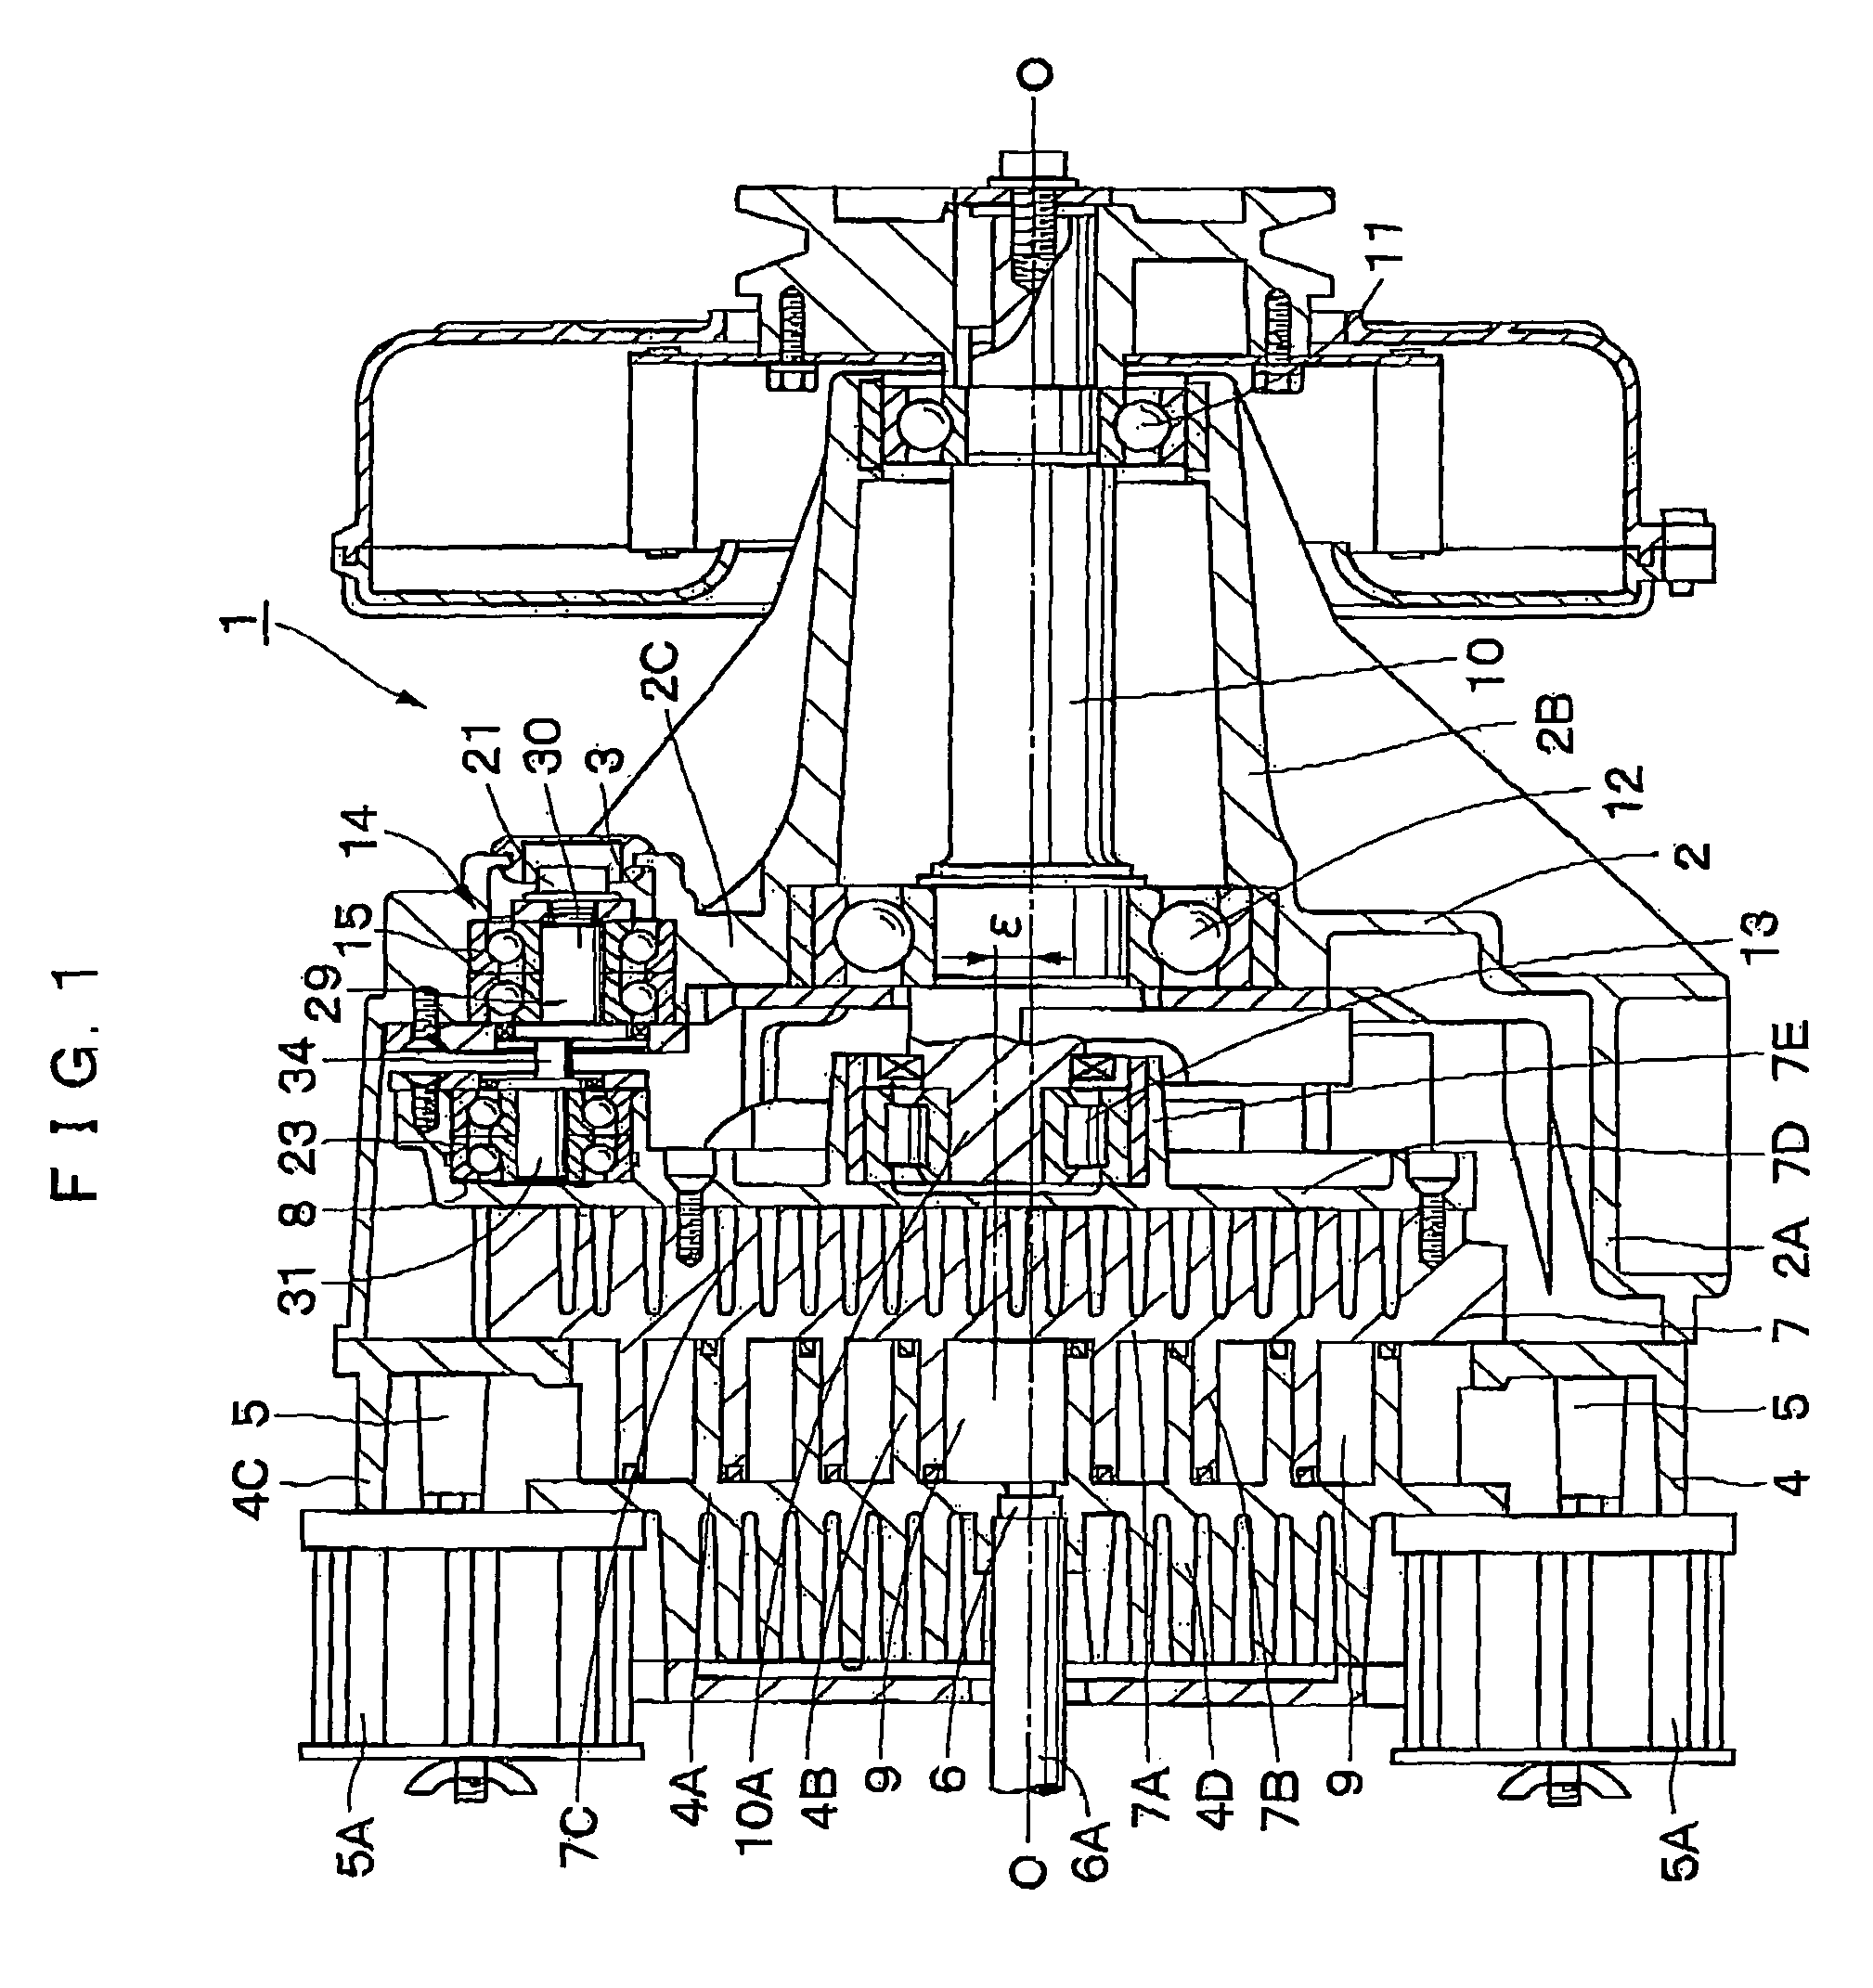 Scroll-type fluid machine that reduces centrifugal force of an orbiting scroll